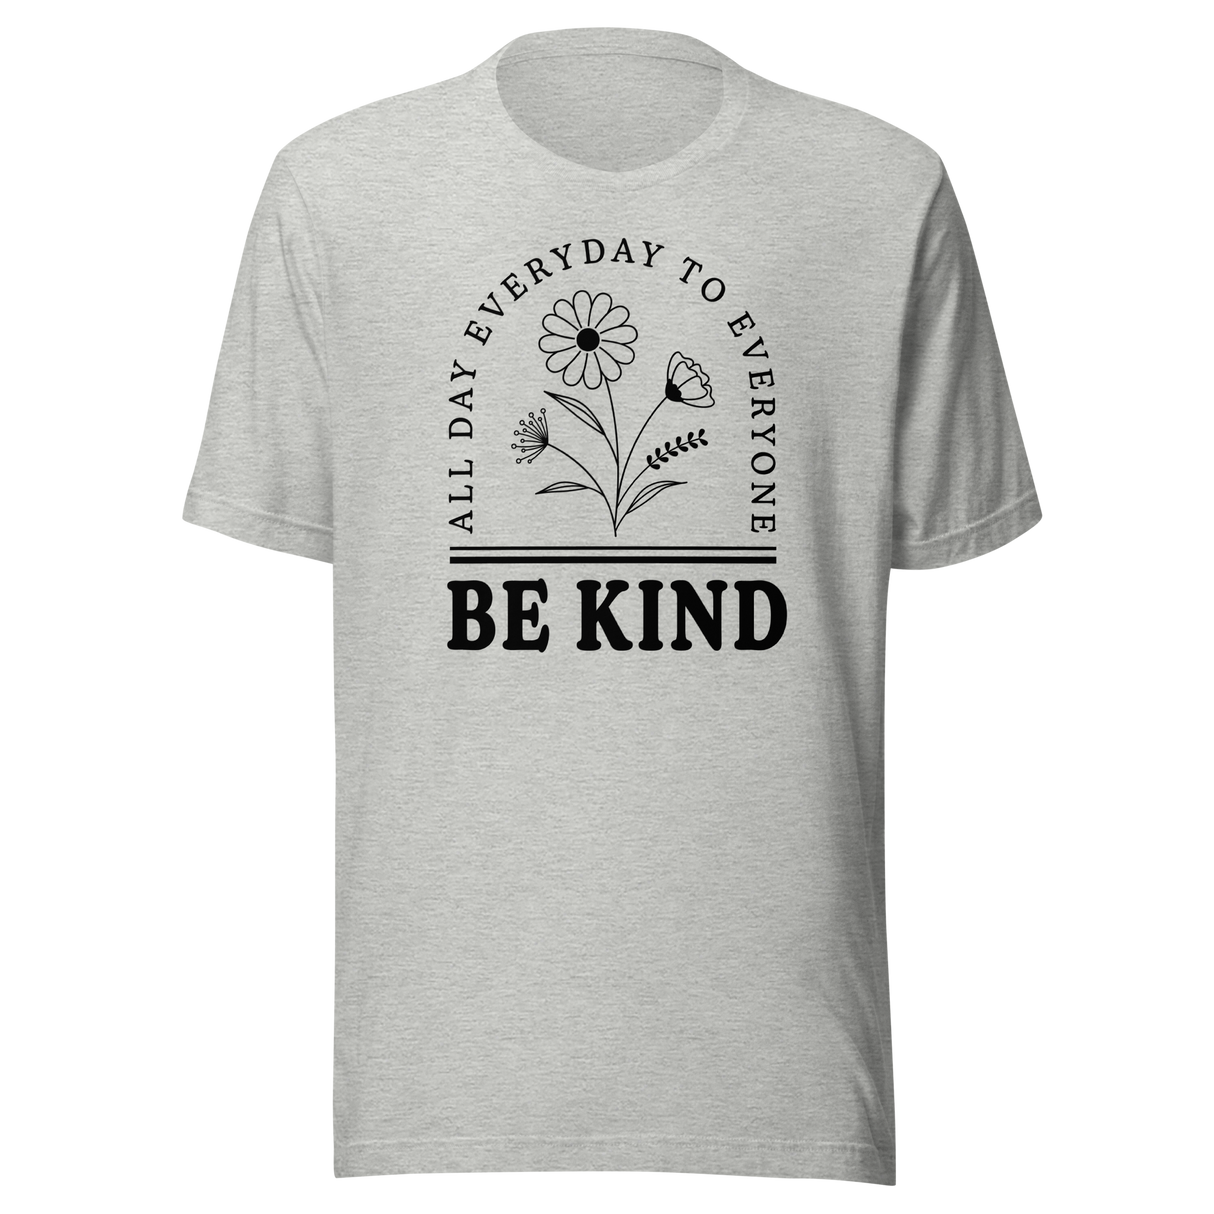 Be Kind All Day Everyday To Everyone - Inspirational Tee - Life T-Shirt - Inspirational Tee - Kind T-Shirt - Positivity Tee